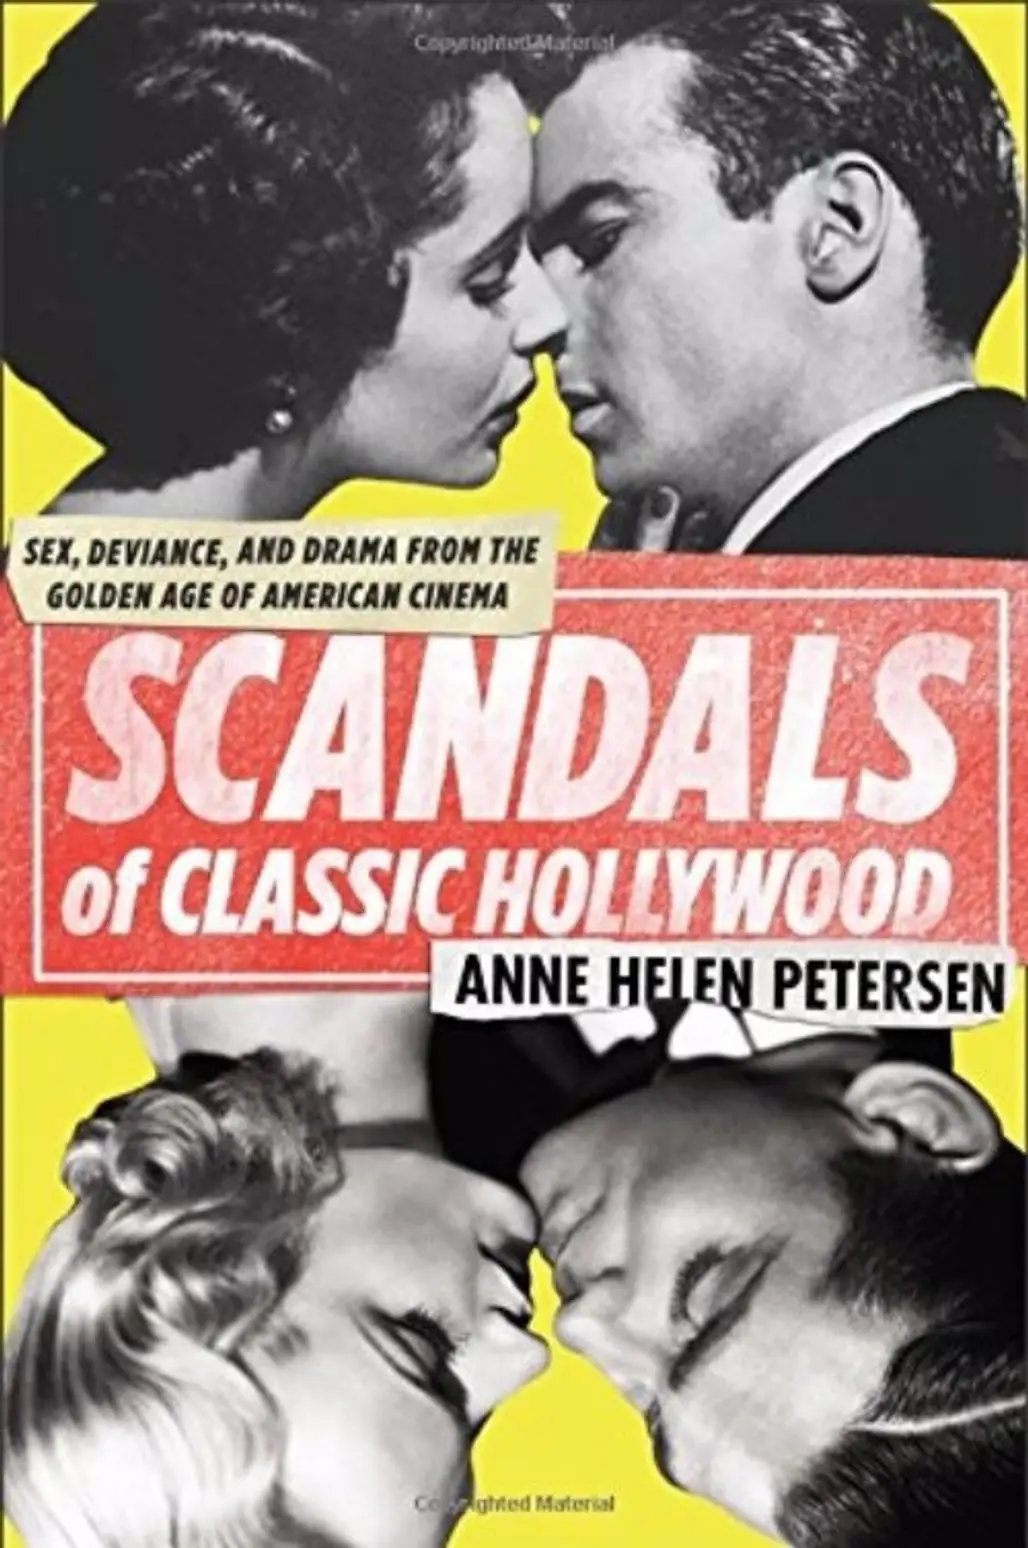 Scandals of Classic Hollywood by Anne Helen Peterson